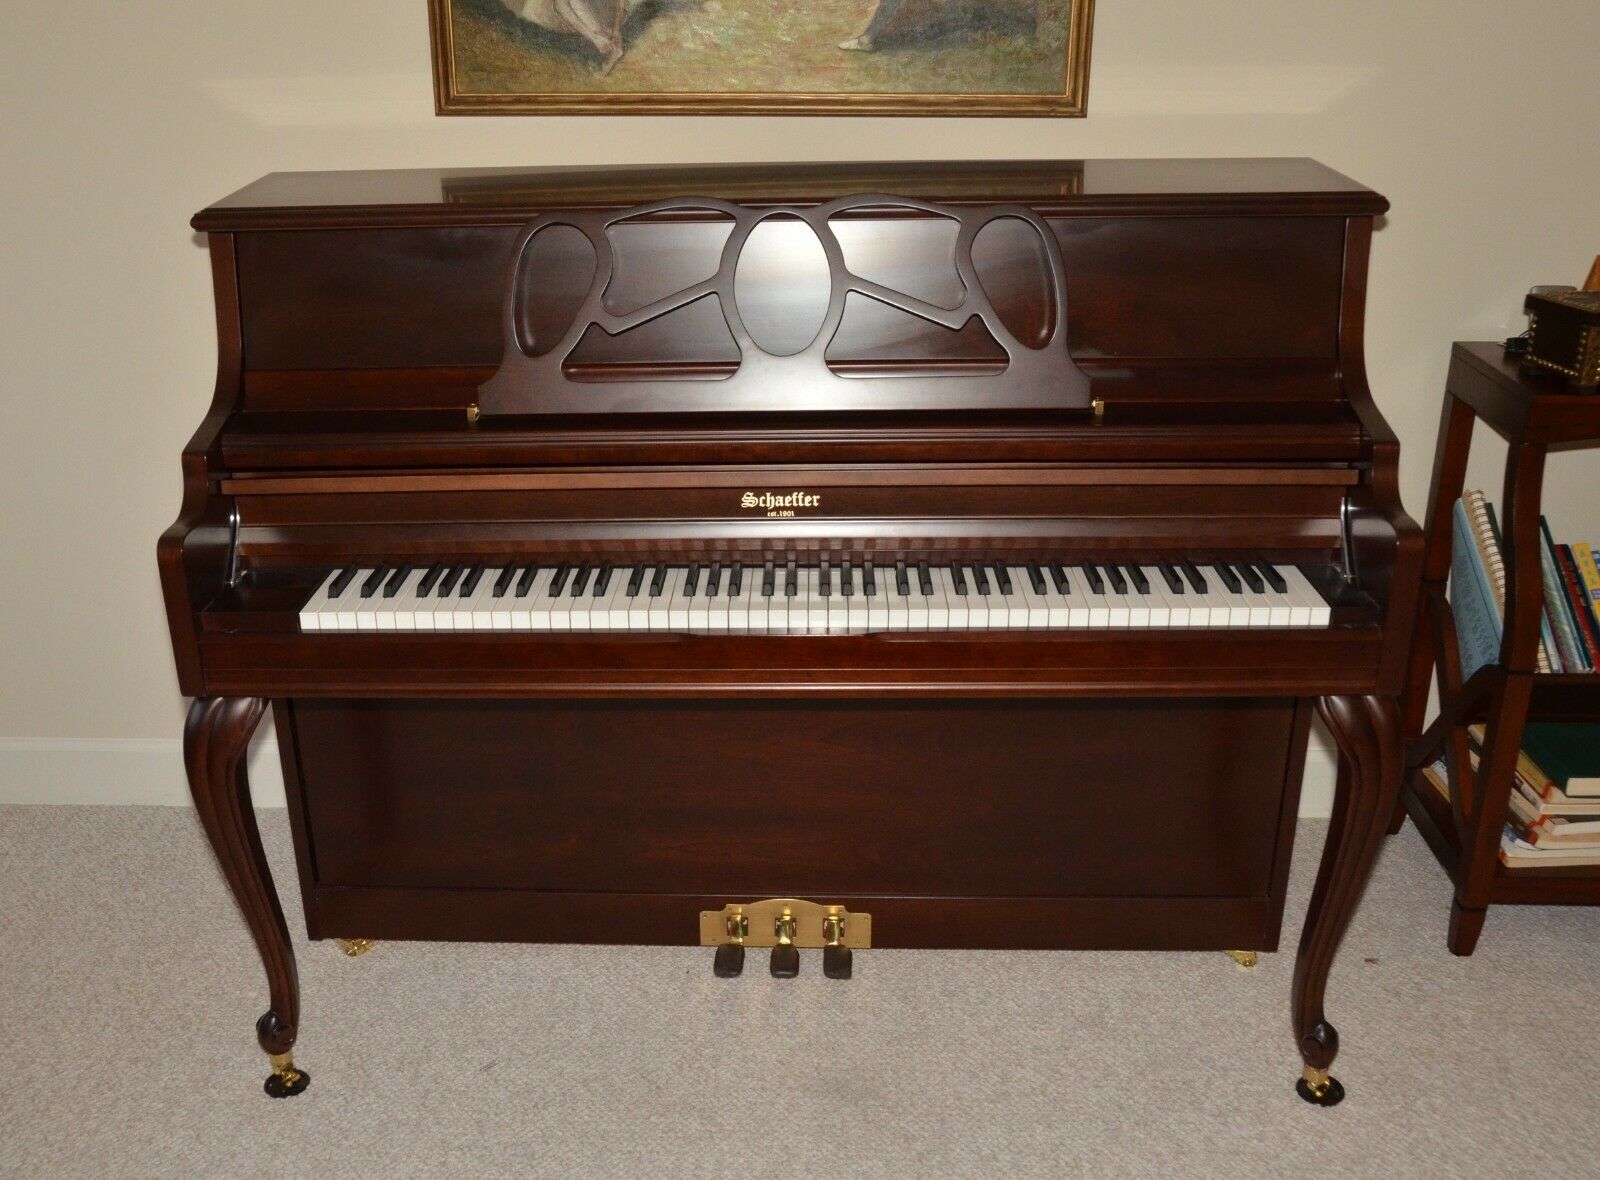 Pickup Only - Schaeffer Mahogany Upright Piano - Model #115 With Bench